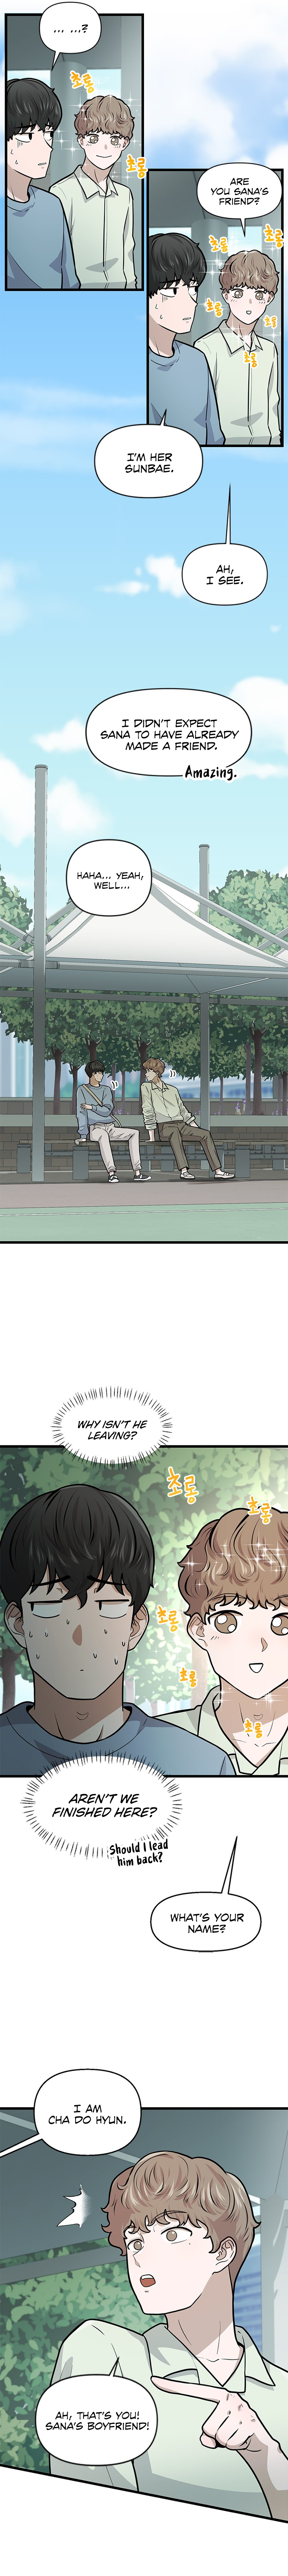 Sigeup Yeonae Chapter 17 - Page 12